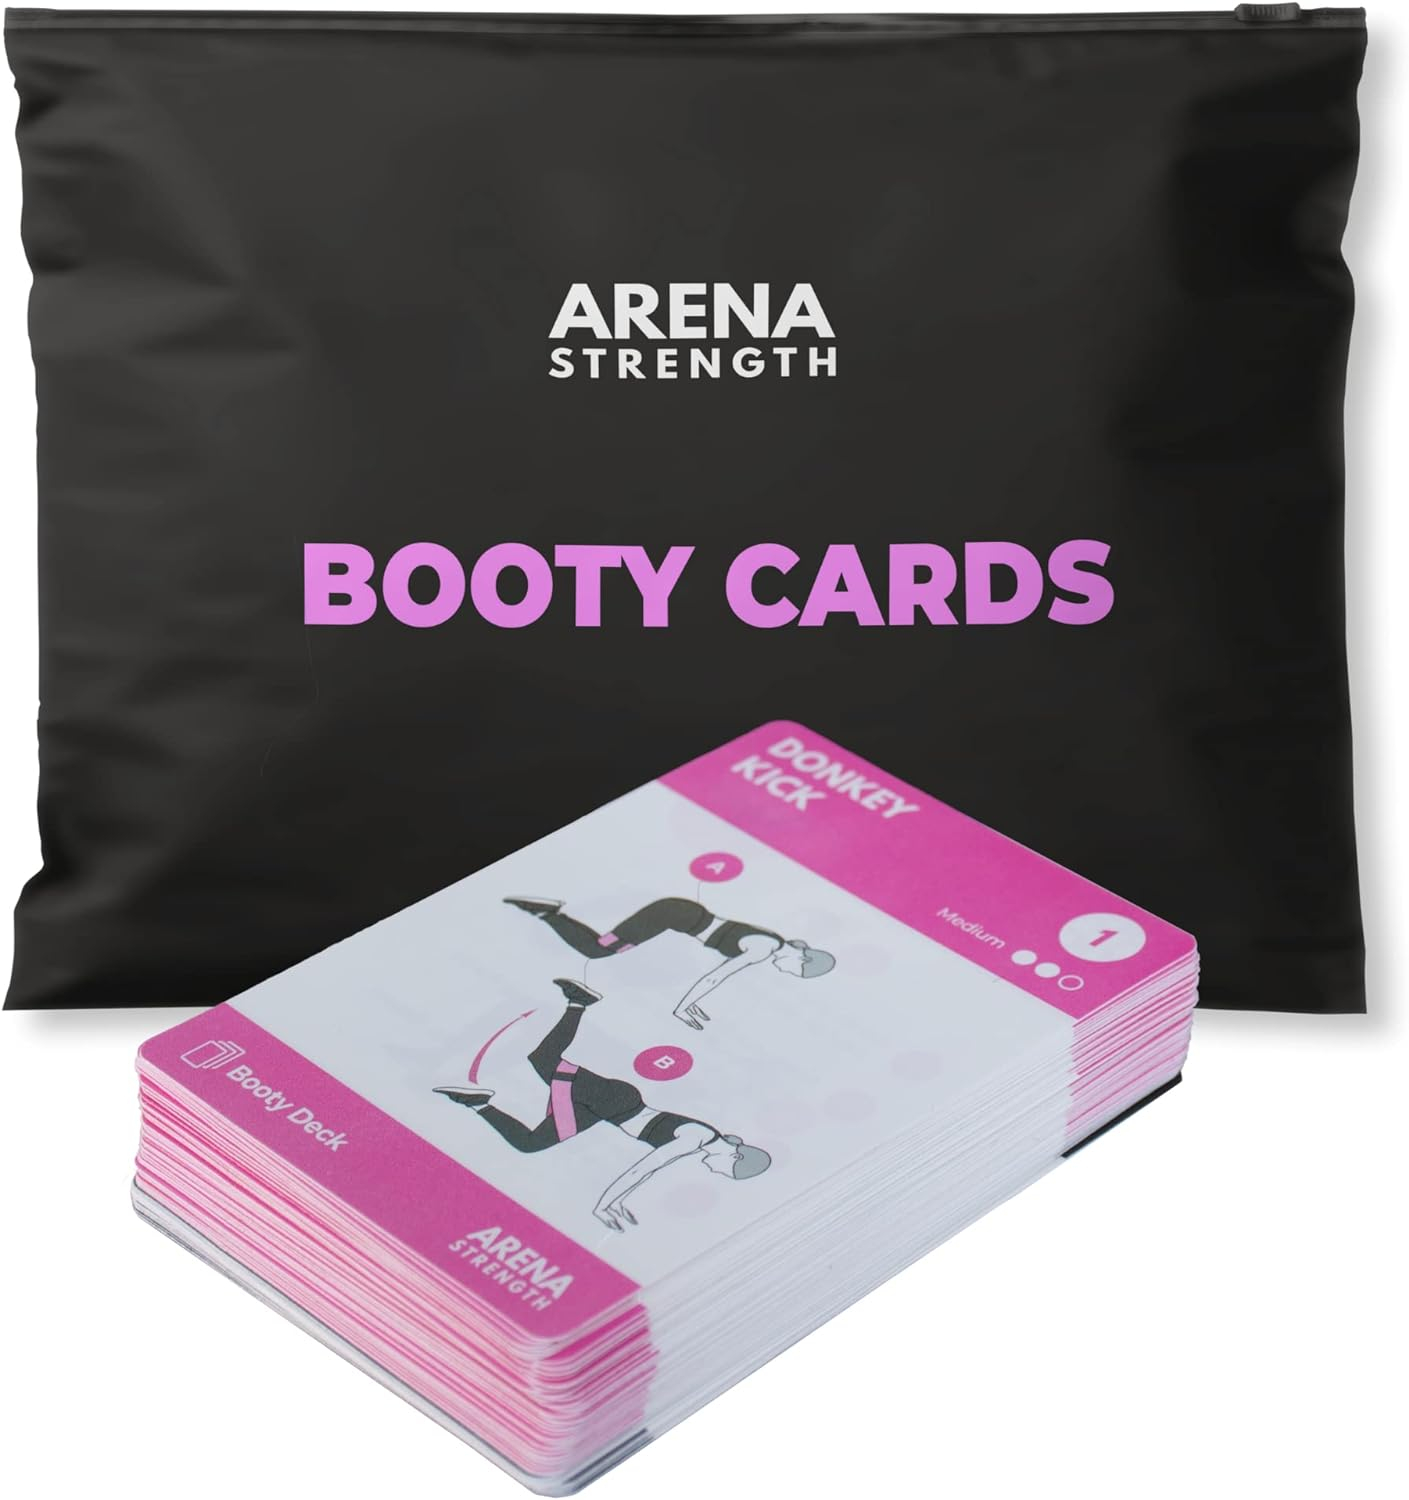 Arena Strength Booty Fitness Workout Cards- Instructional Deck for Band Workouts, Beginner Guide Resistance Training Exercises at Home. Includes Routines.